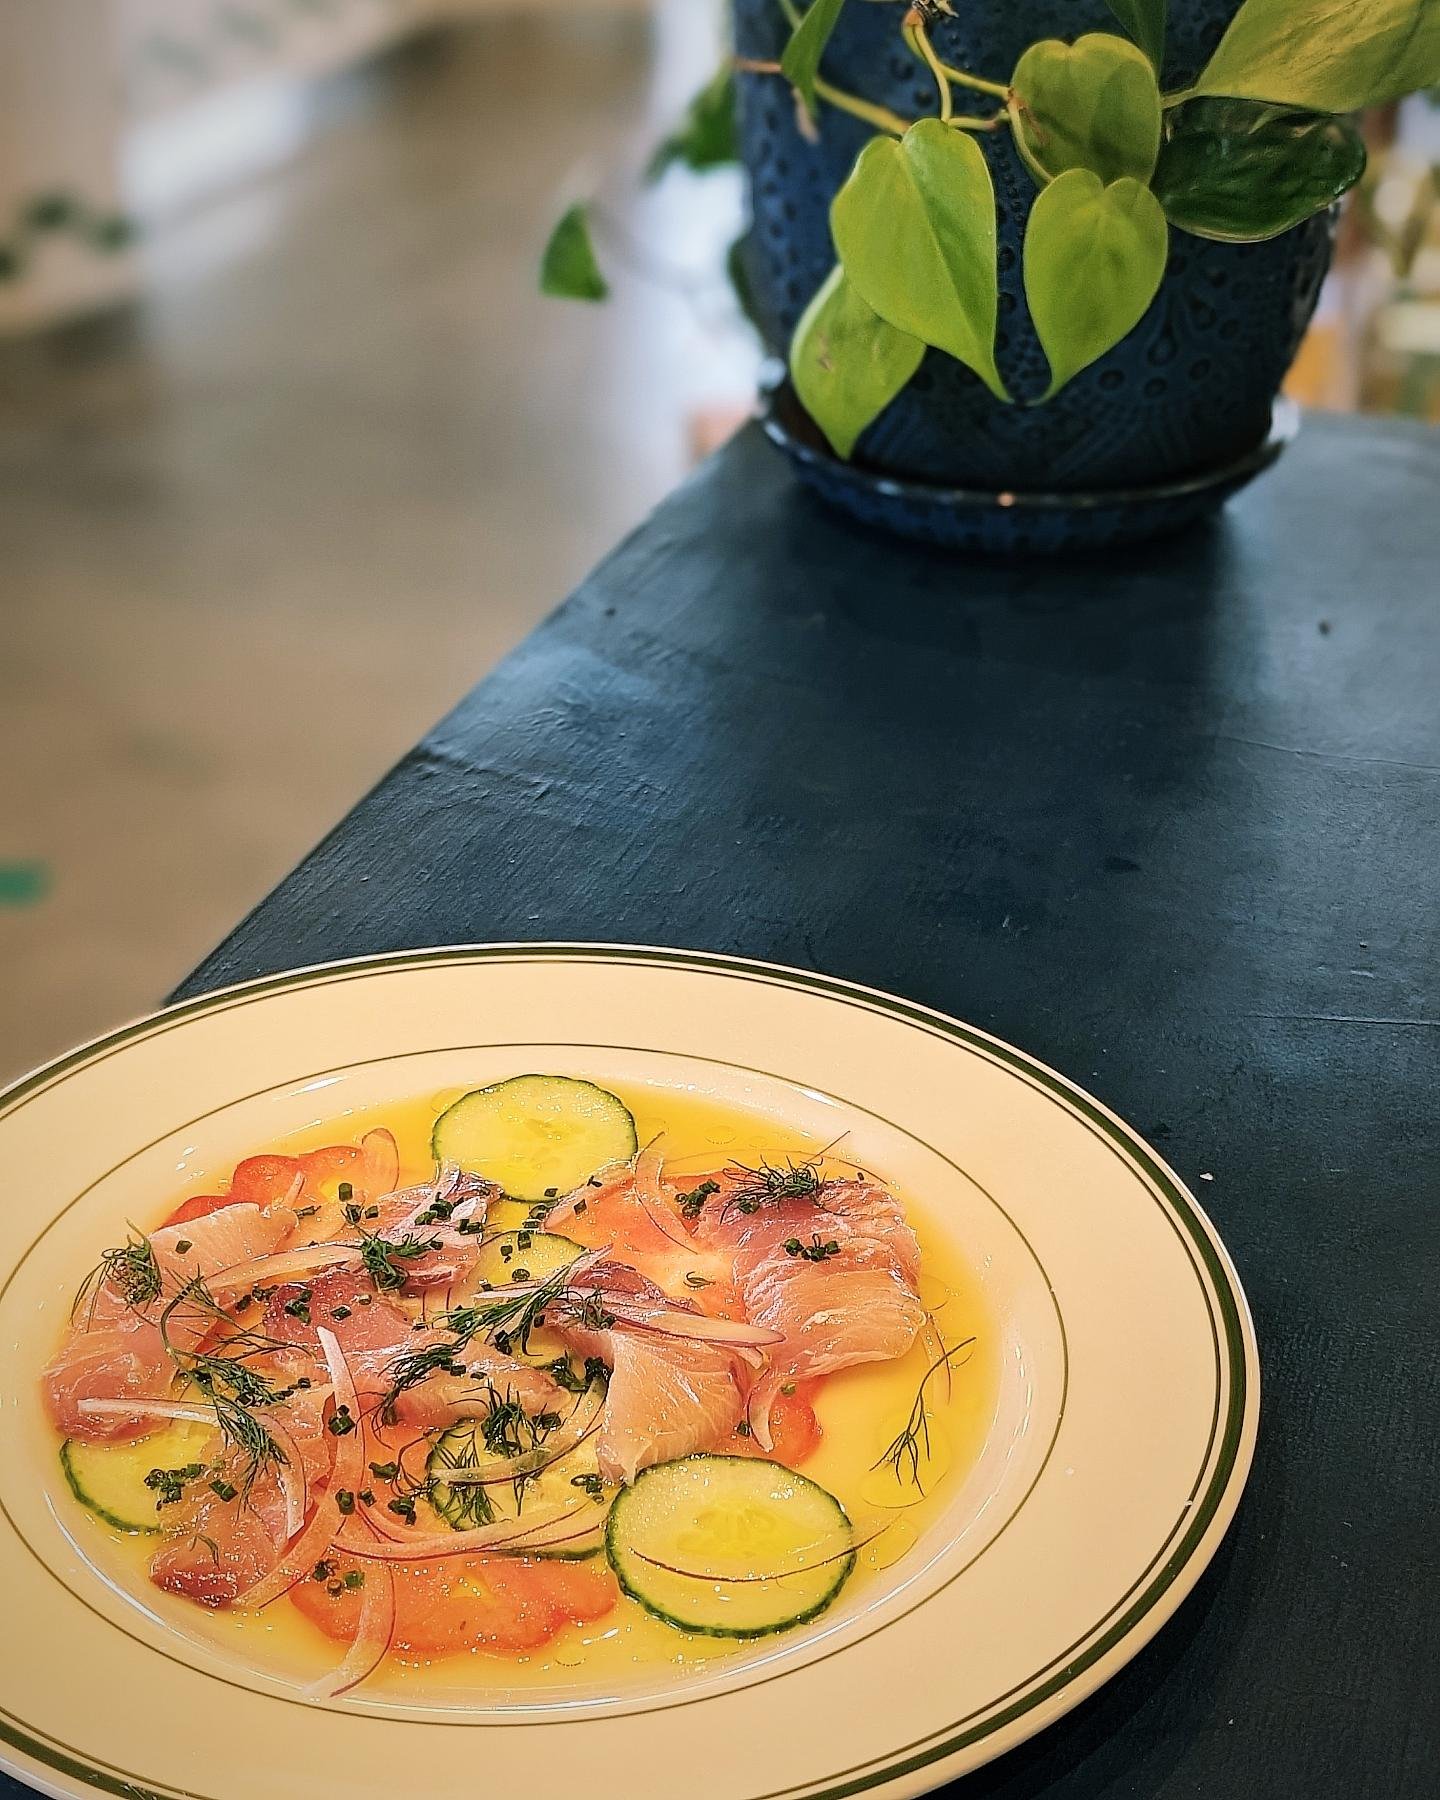 Trefethen Reisling is our wine of the month! We have two specials paired with it. 

Yellowtail crudo with old fashioned tomato, cucumber salad and citrus (insanely delicious!)

Bbq dry rub pork loin with fried potatoes and chili arugula salad (spicy 